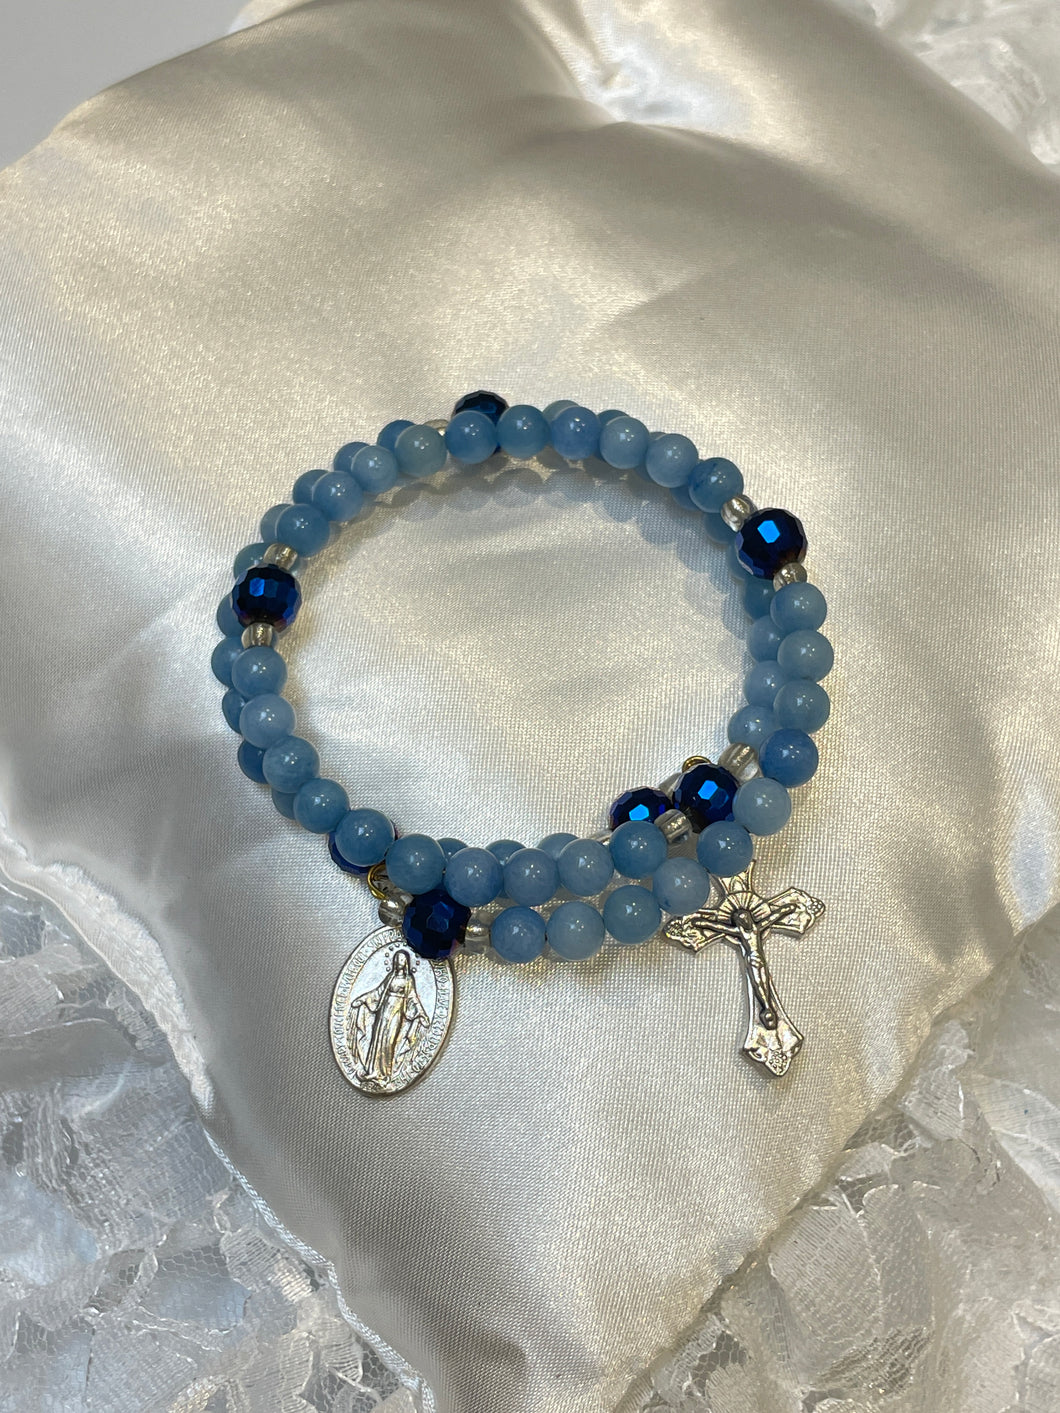 Light Blue and Navy Gemstone Rosary Bracelet with Miraculous Medal and Crucifix Charms